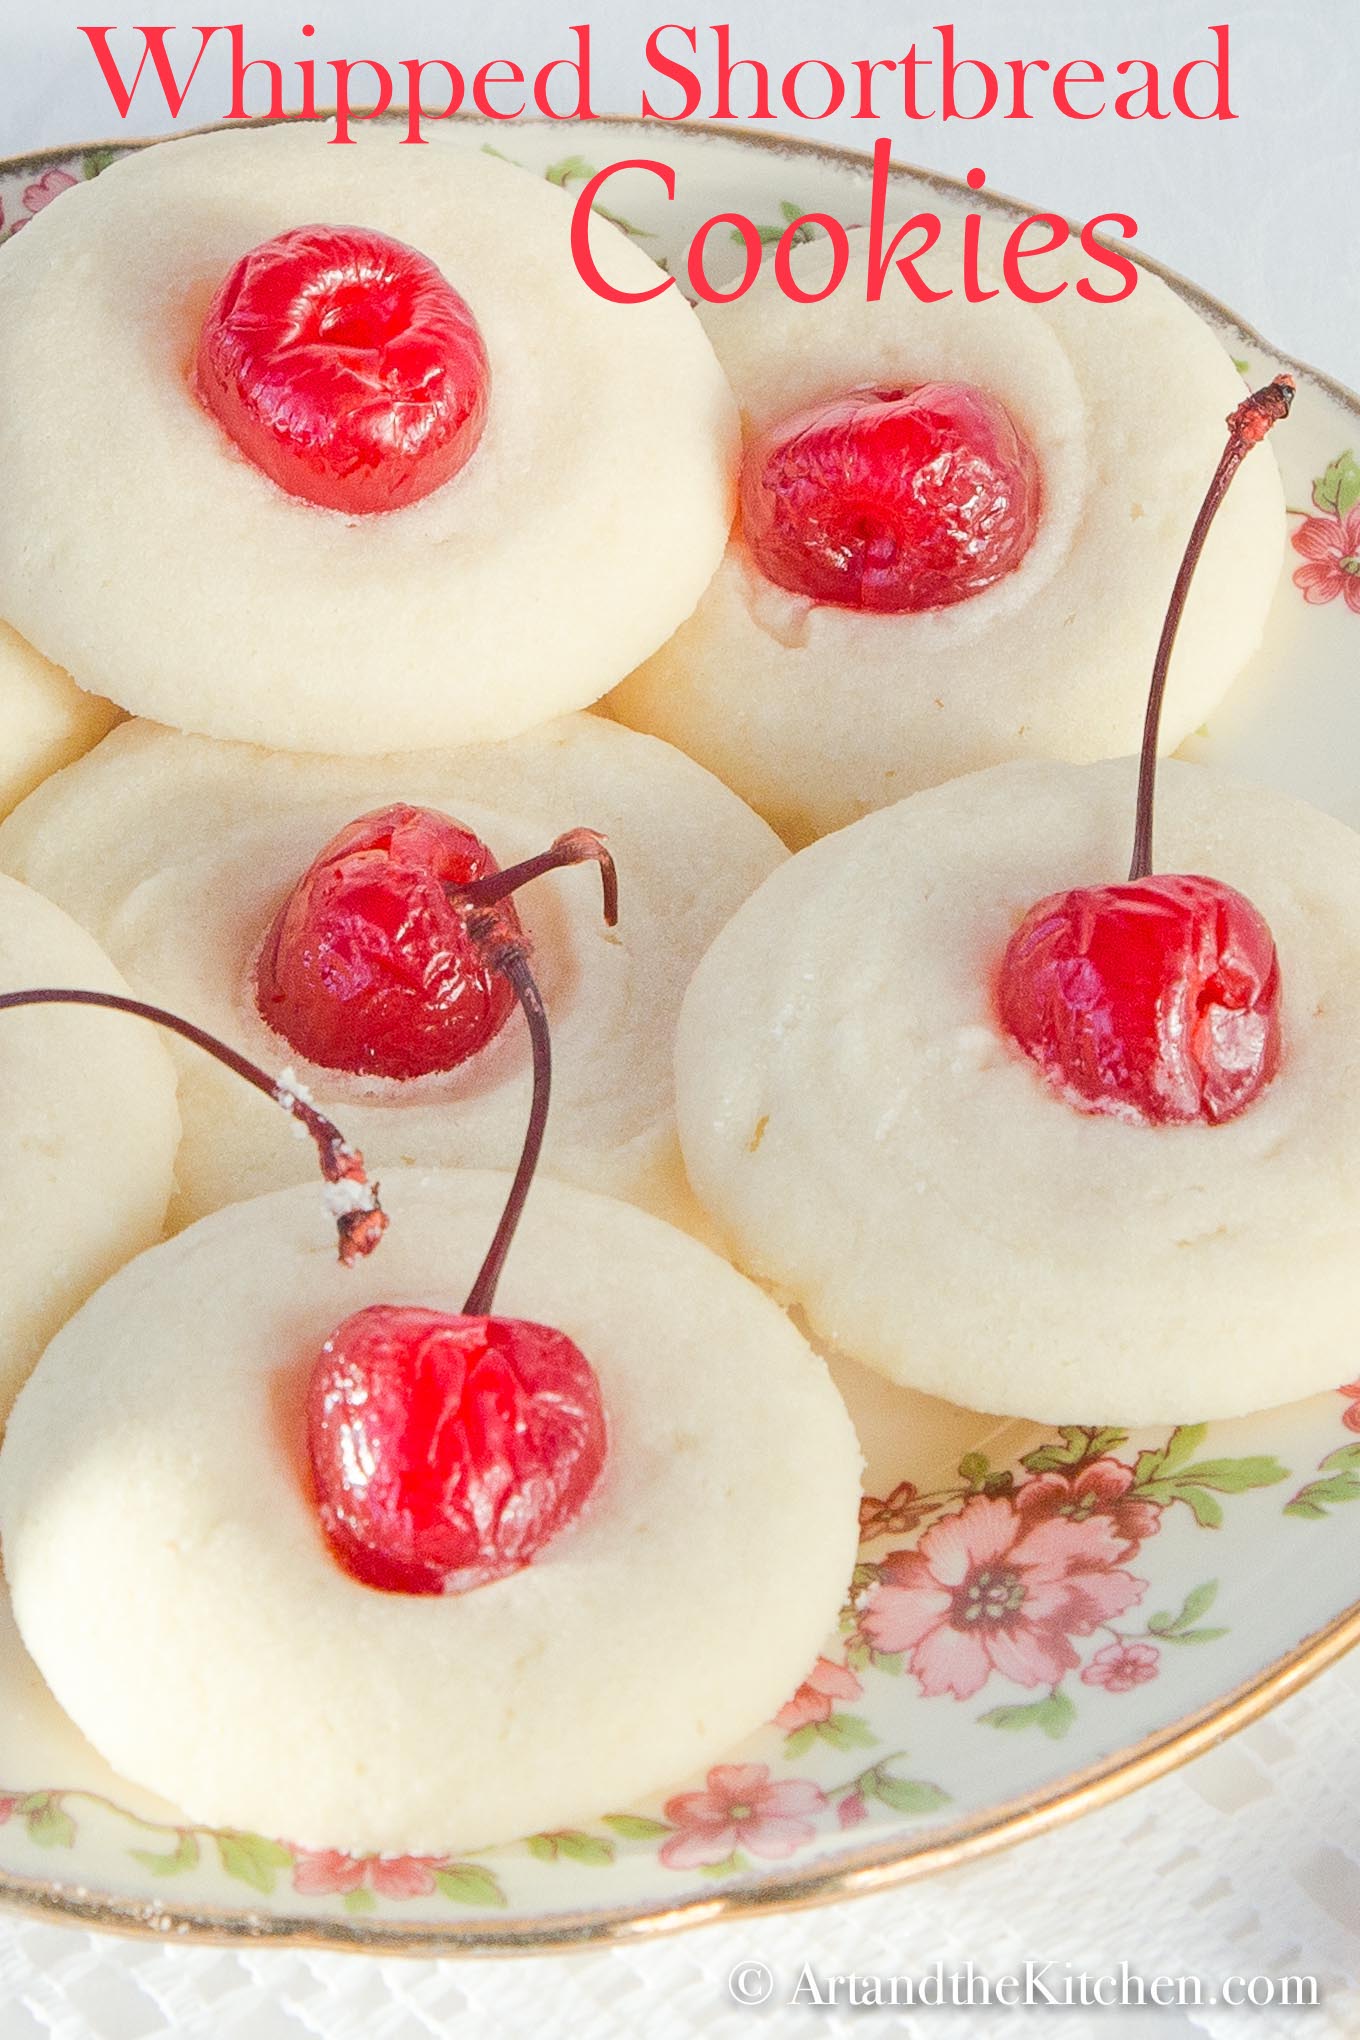 Decorative plate filled with shortbread cookies topped with maraschino cherries.